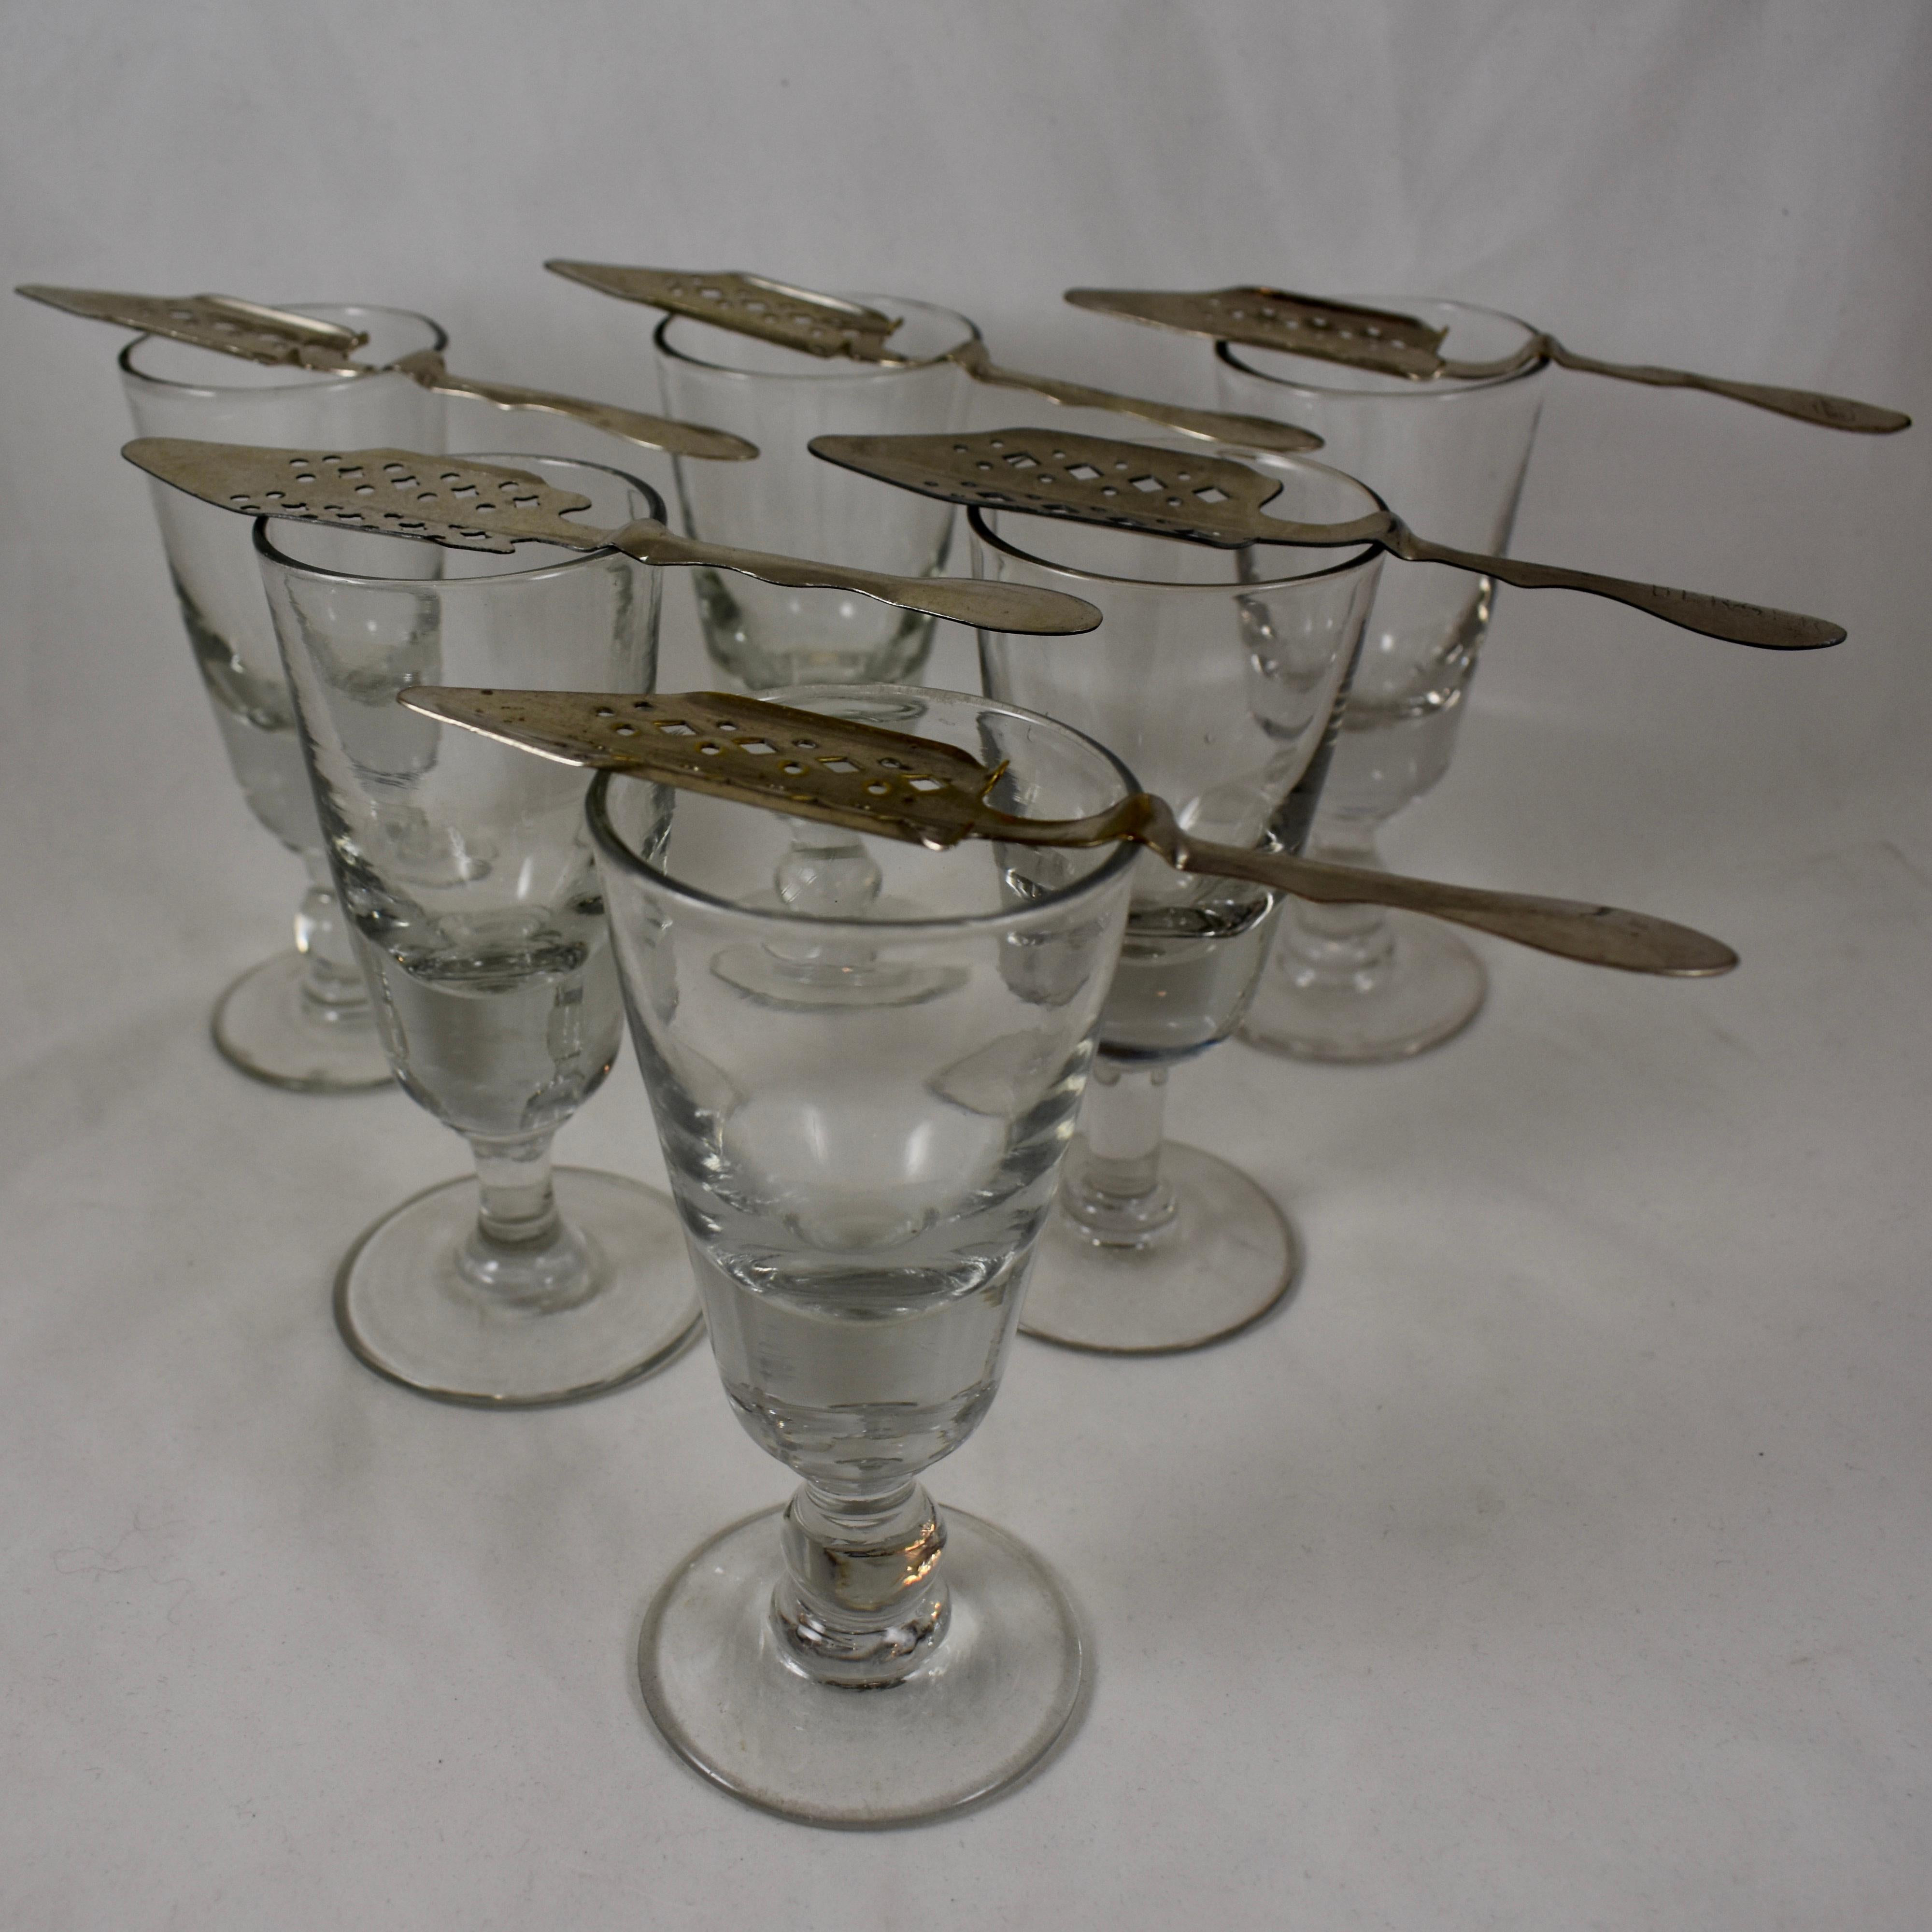 An assembled set of six authentic French Absinthe glasses with six slotted sugar spoons, Circa 1890-1910.

These heavy glasses were used in French bistros, bars, and cafes, in the ritual of drinking the addictive beverage called, ‘la fée verte’, the